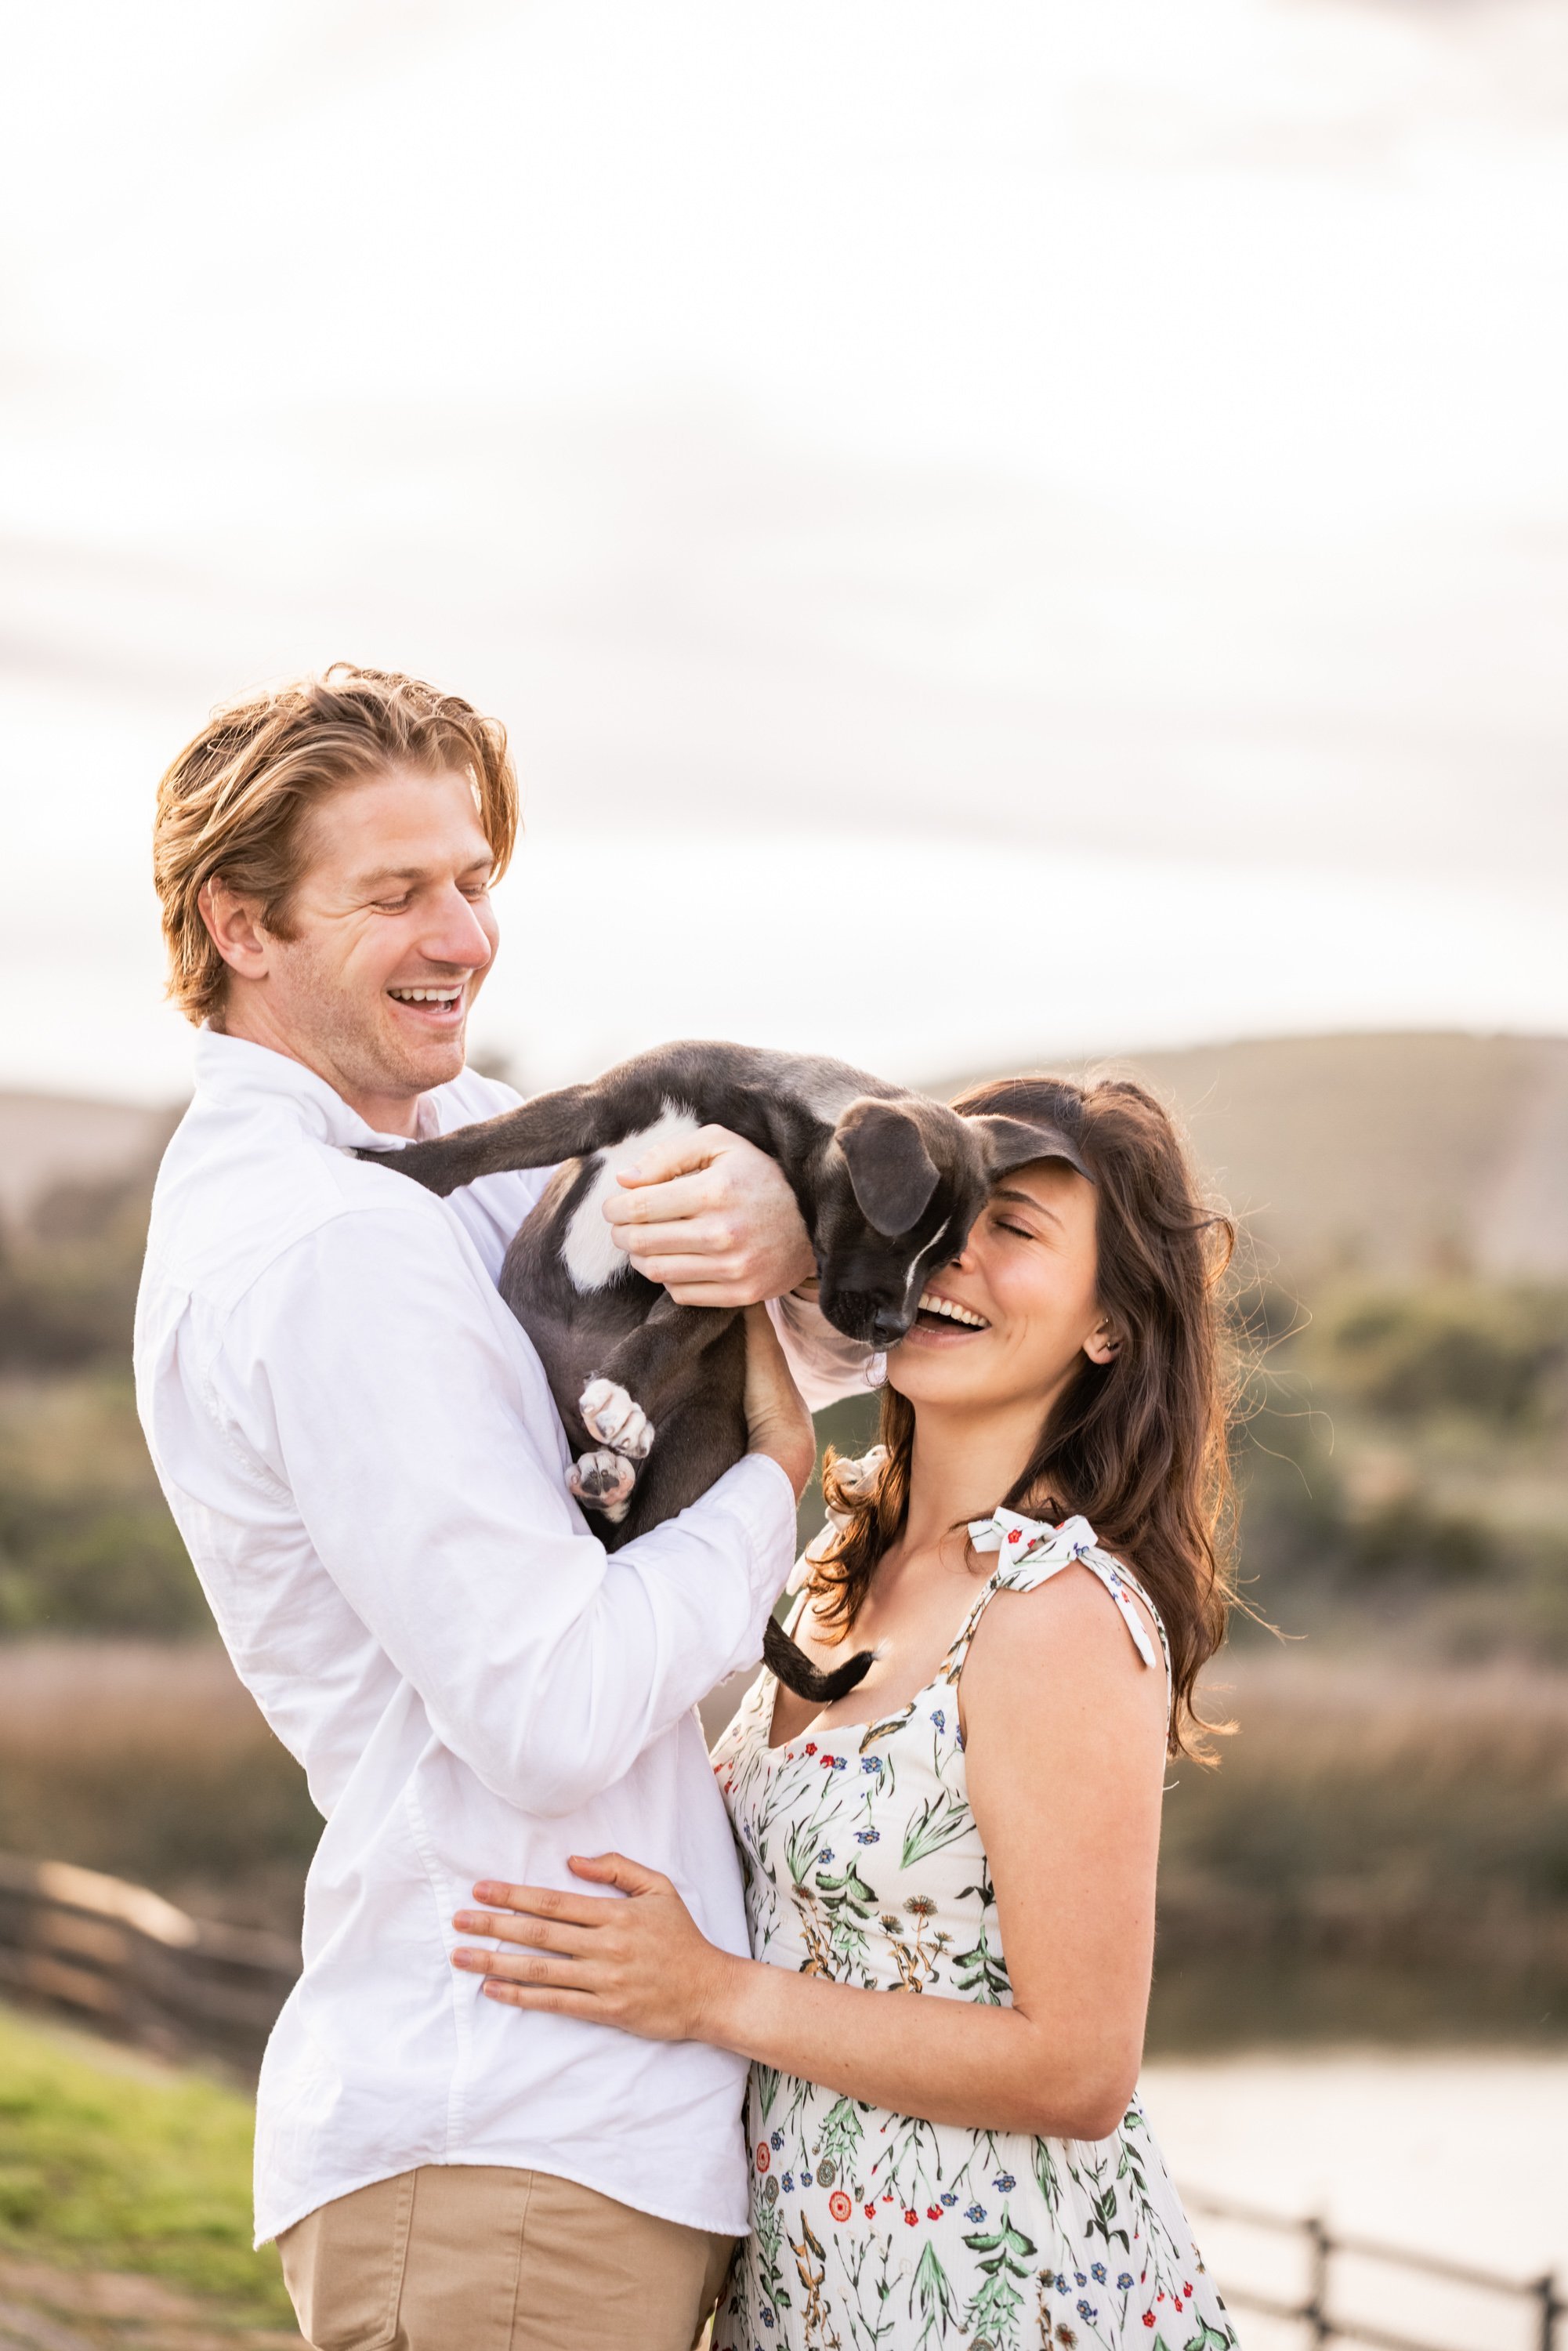 www.santabarbarawedding.com | Veils &amp; Tails Photography | Couple Holding Puppy at Engagement Shoots